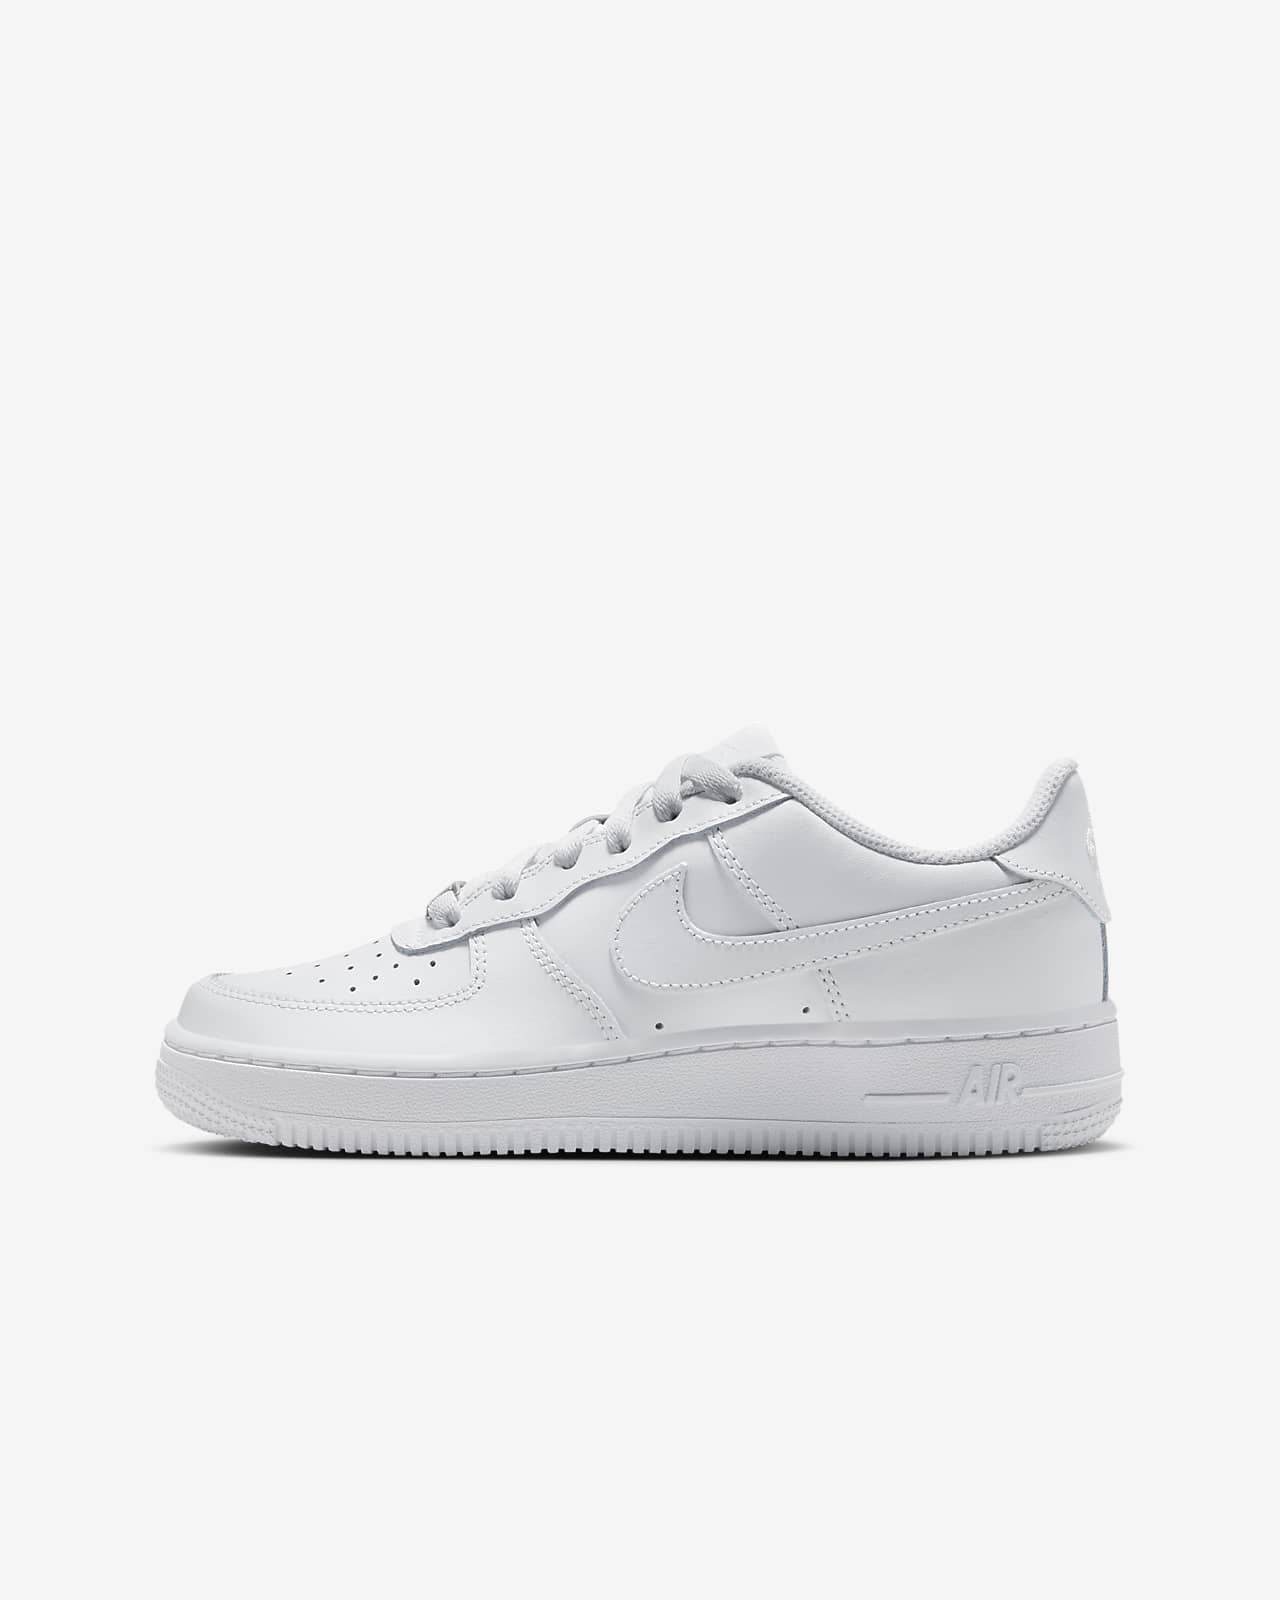 nike white air force shoes